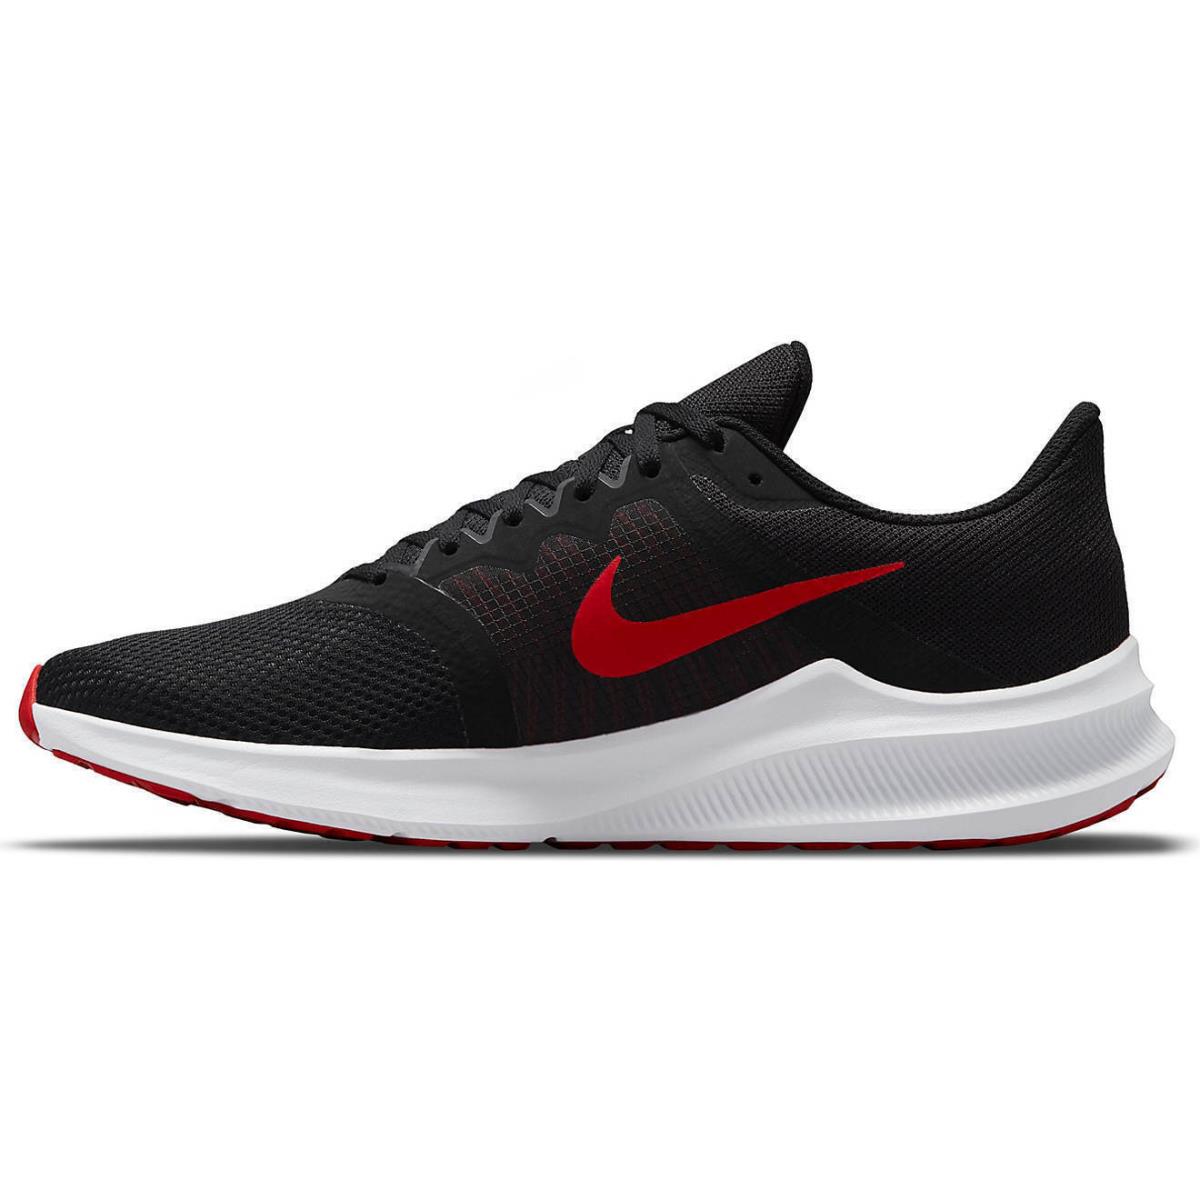 Nike Mens Downshifter 11 Running Shoes CW3411 005 - BLACK UNIVERSITY RED WHITE